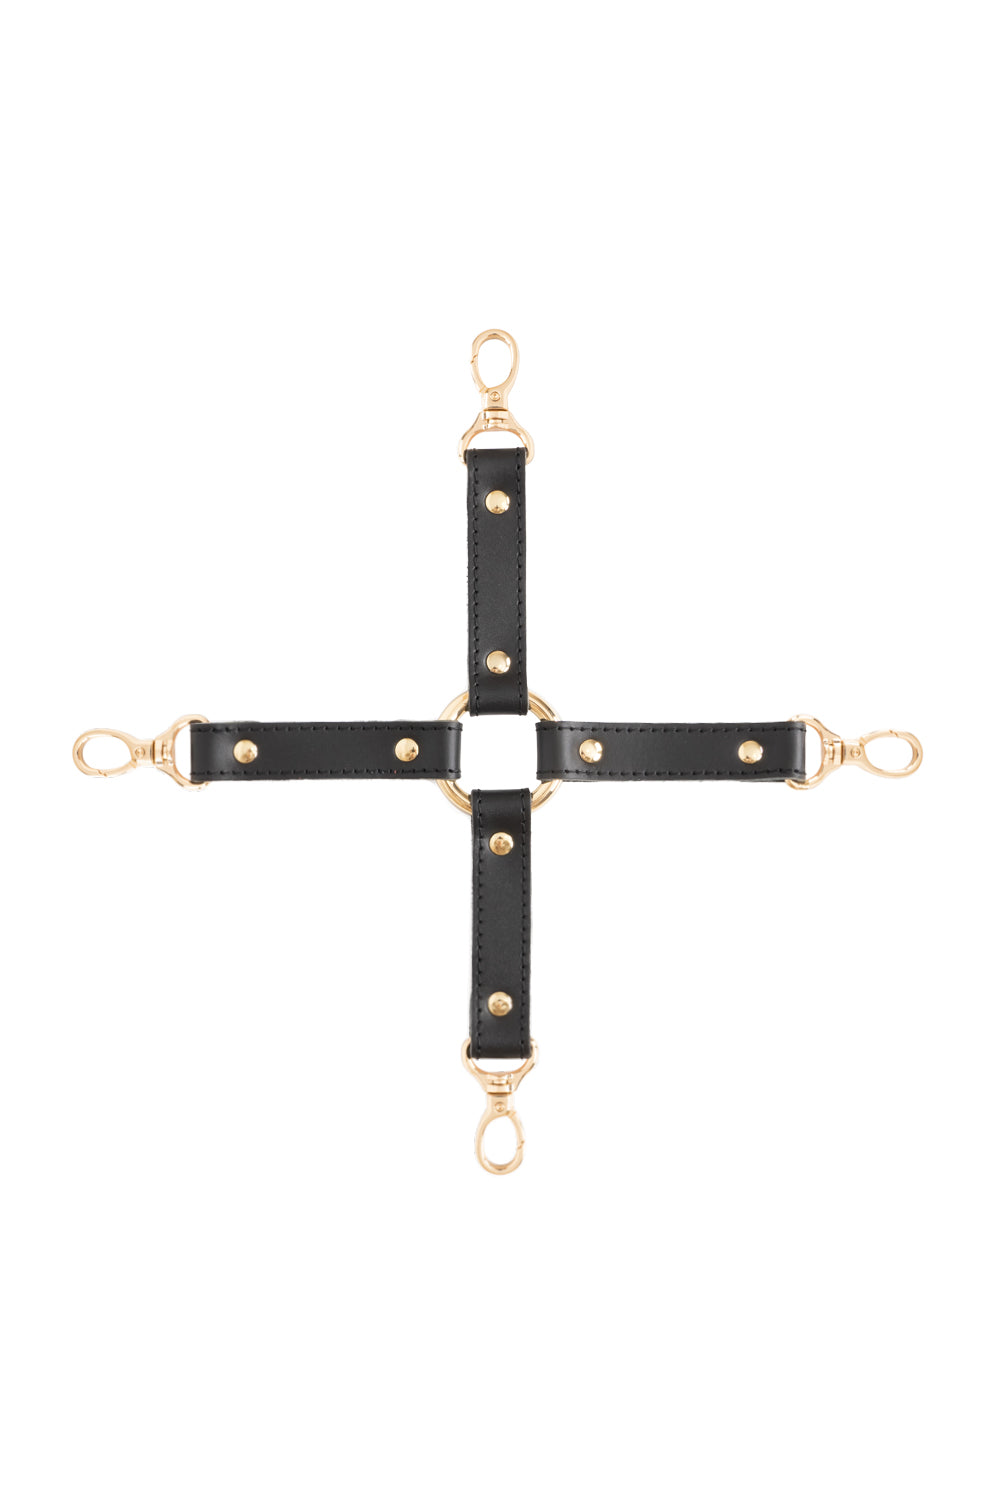 4-way Cross Strap Connector with a ring